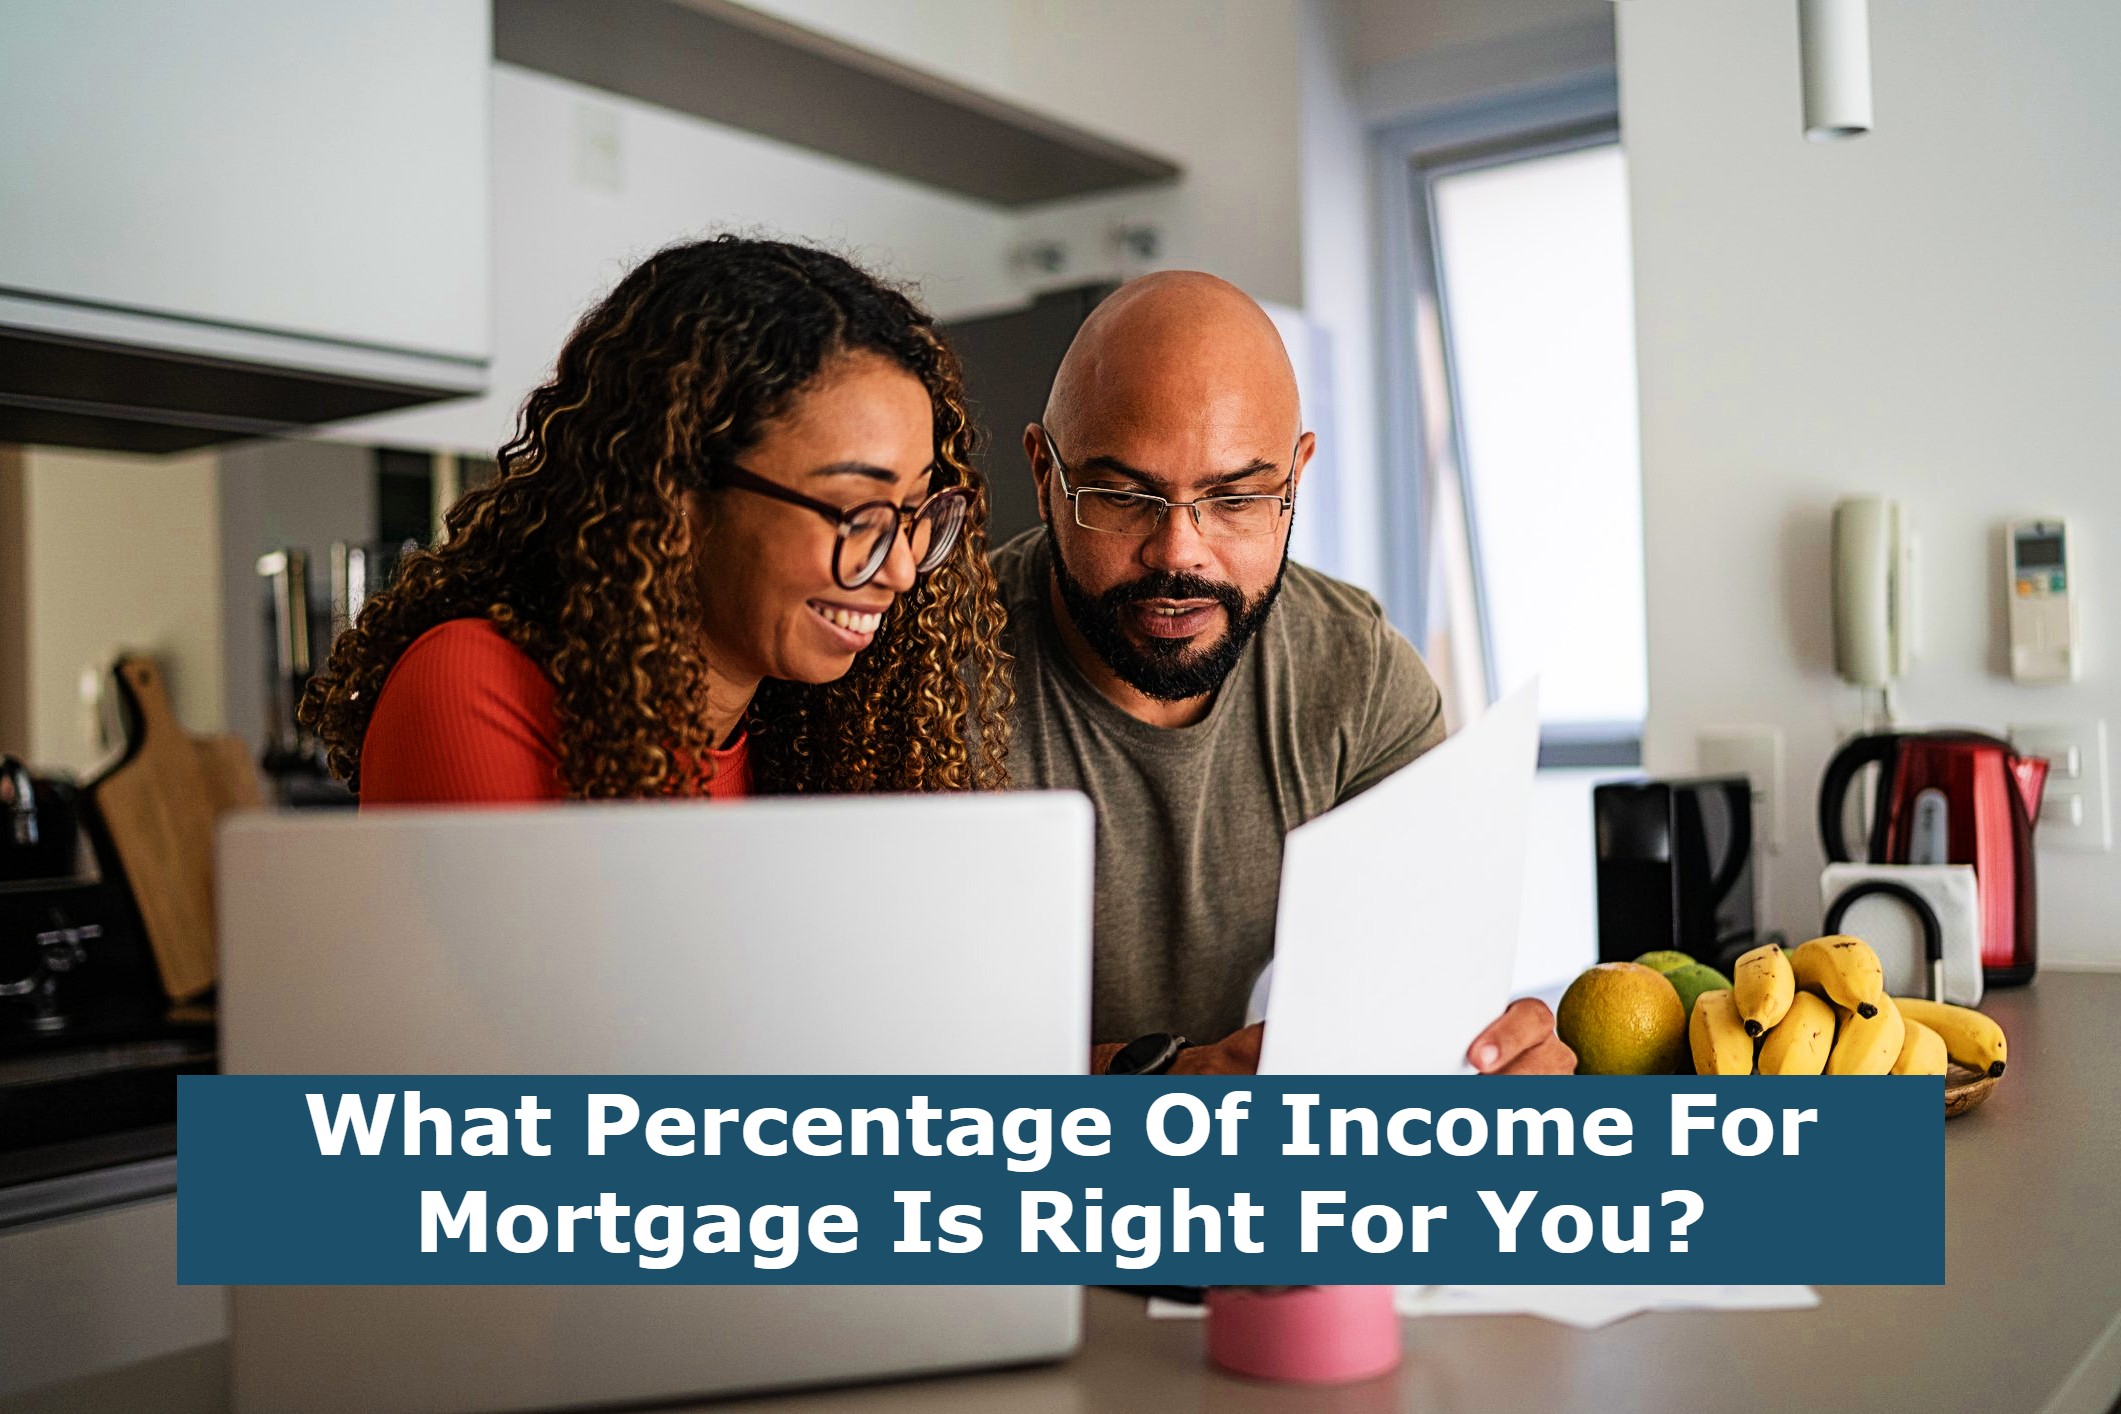 What Percentage Of Income For Mortgage Is Right For You?